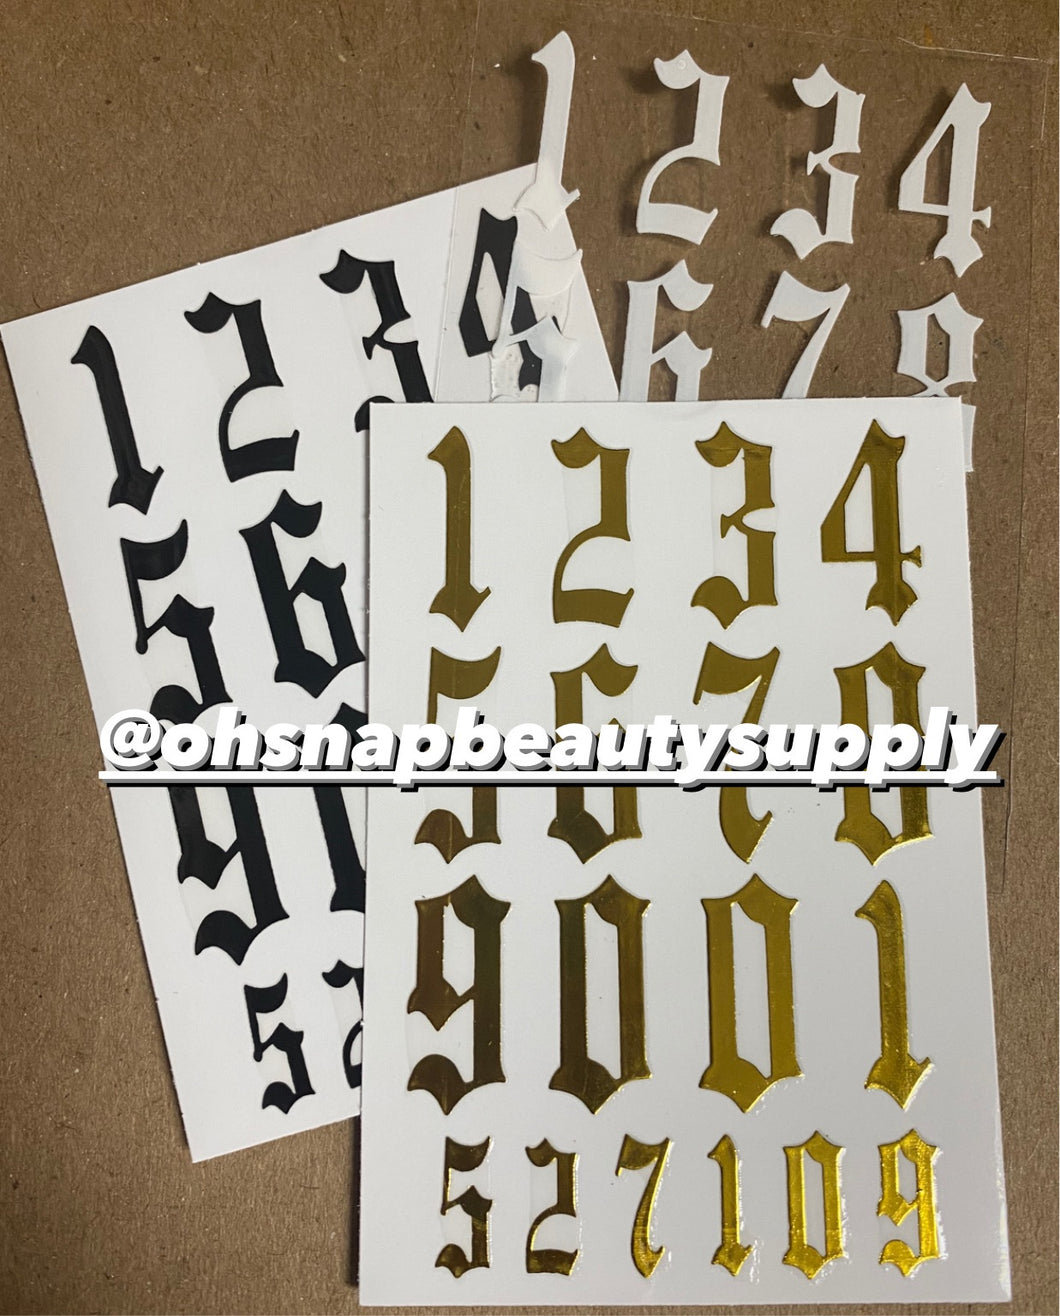 Large OLD ENGLISH NUMBERS (Gold, White & Black)Stickers 3pcs – Oh Snap!  Beauty Supply